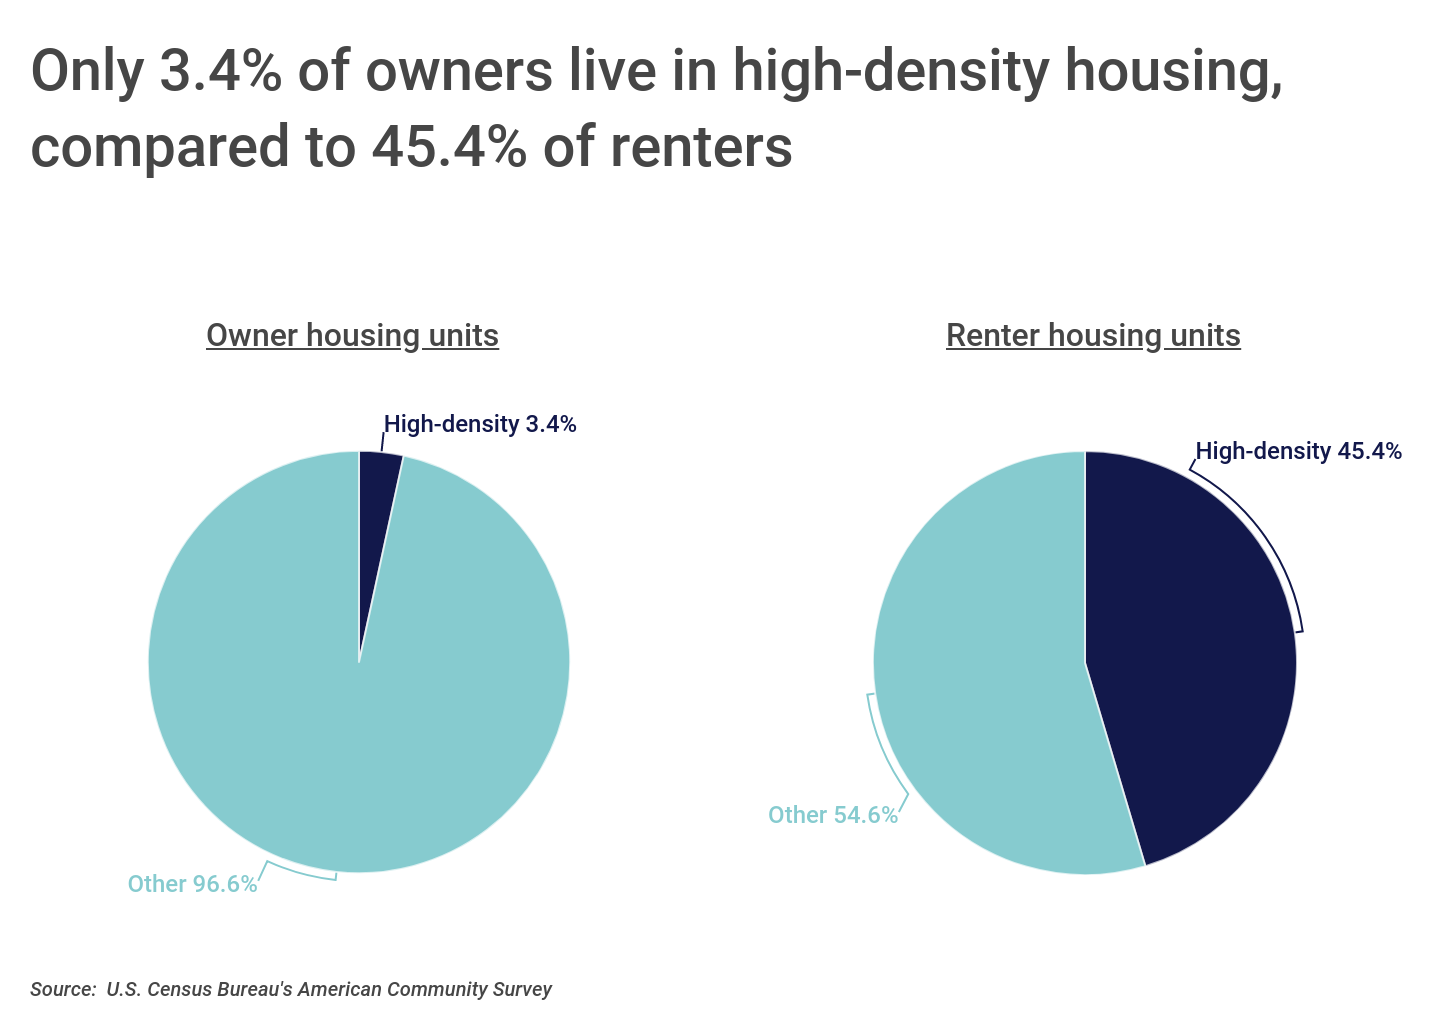 Chart2_Only 3.4% of owners live in high-density housing vs 45.4% of renters